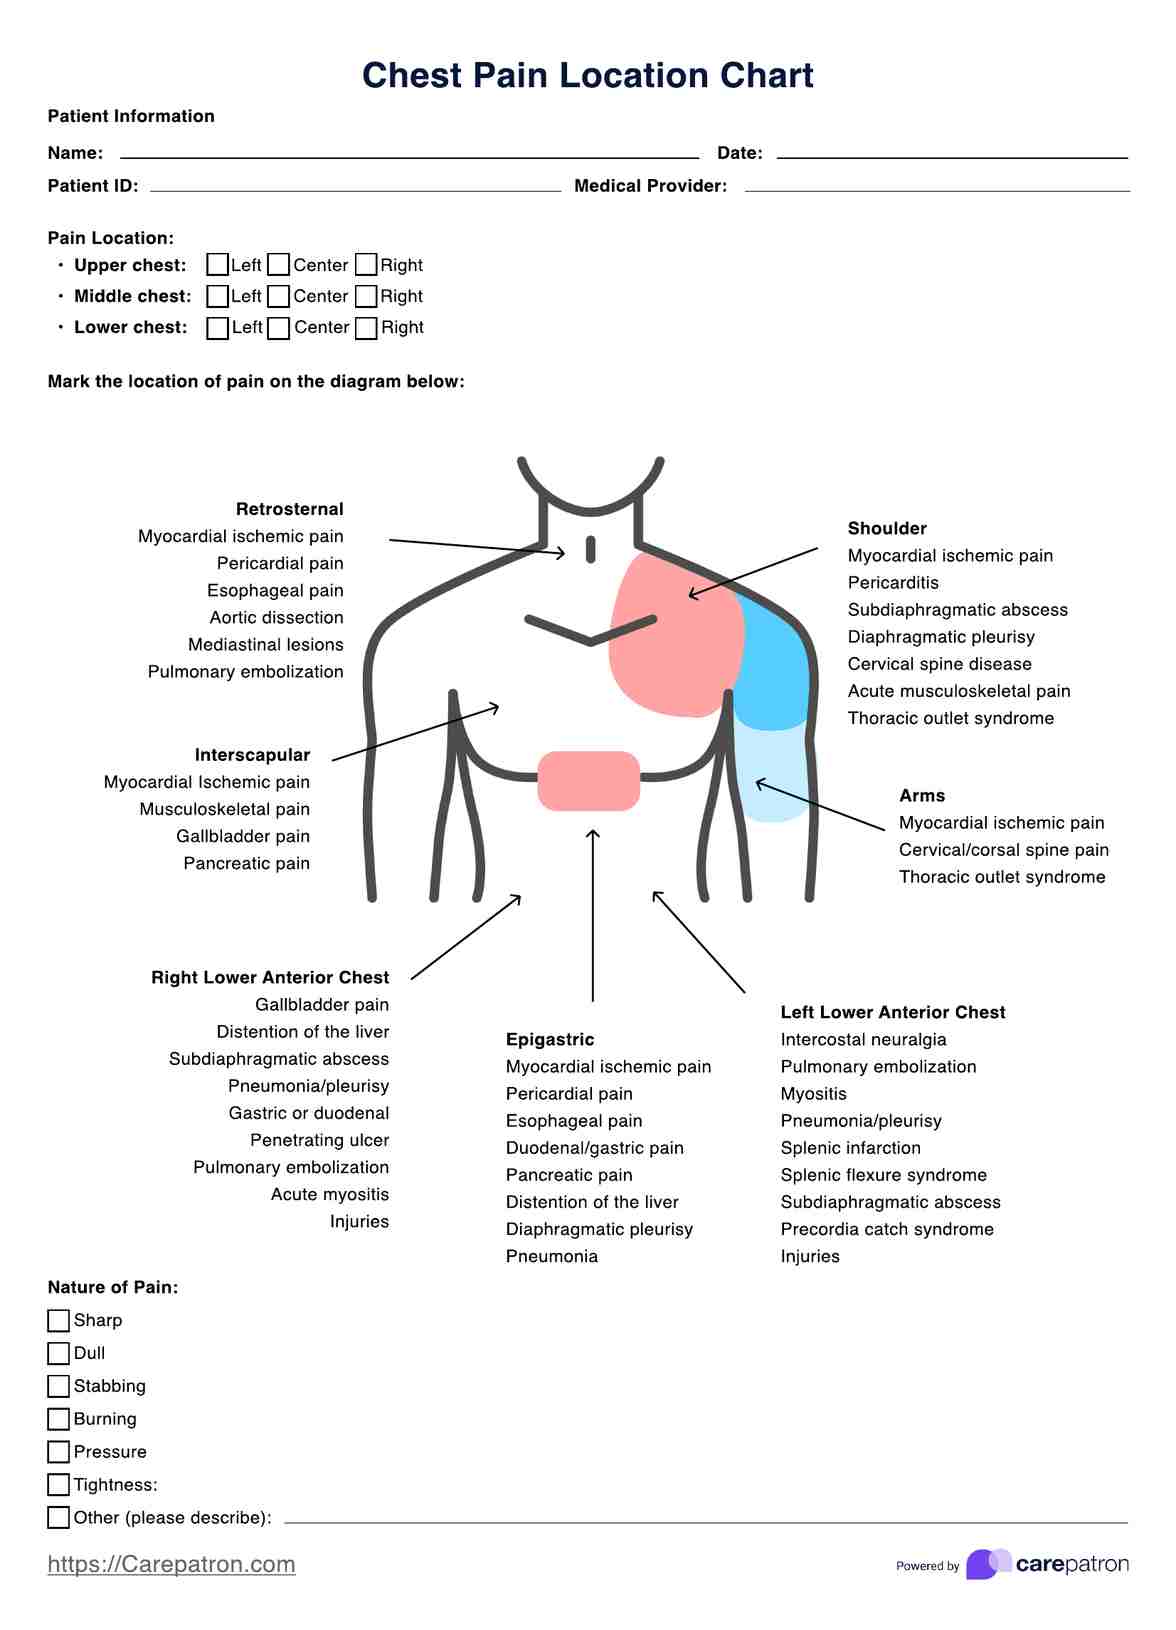 Chest Pain Location Charts PDF Example